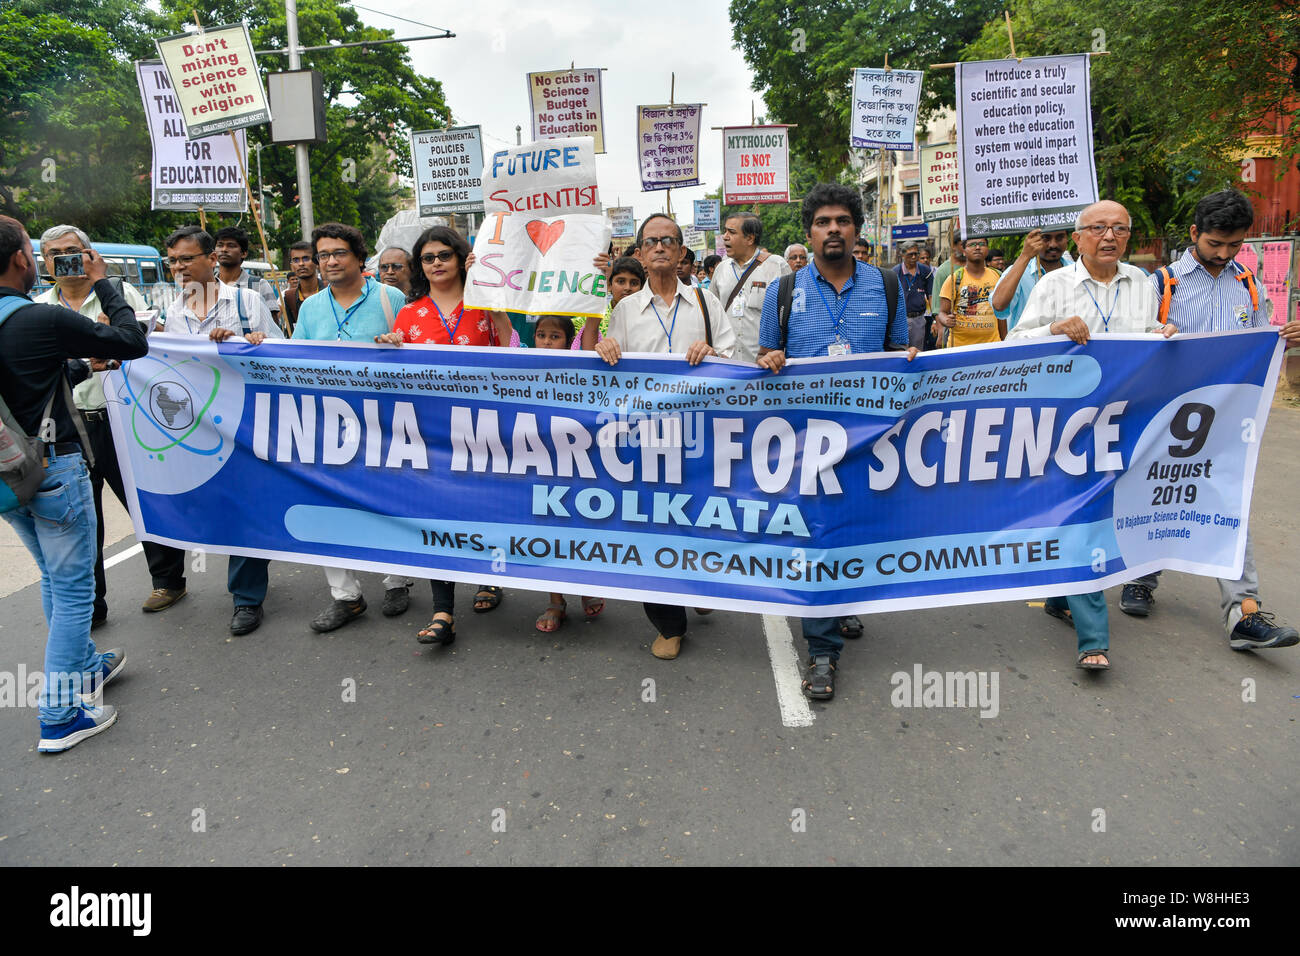 Indian students and scientists hold a banner and placards during the India March for Science in Kolkata.Scientists, scholars and students participate in 'India March for Science' to uphold their various demands like 3% and 10% of GDP allocation for science and education, and raising voice against policymakers pursuing policies that ignore scientific evidence. Stock Photo